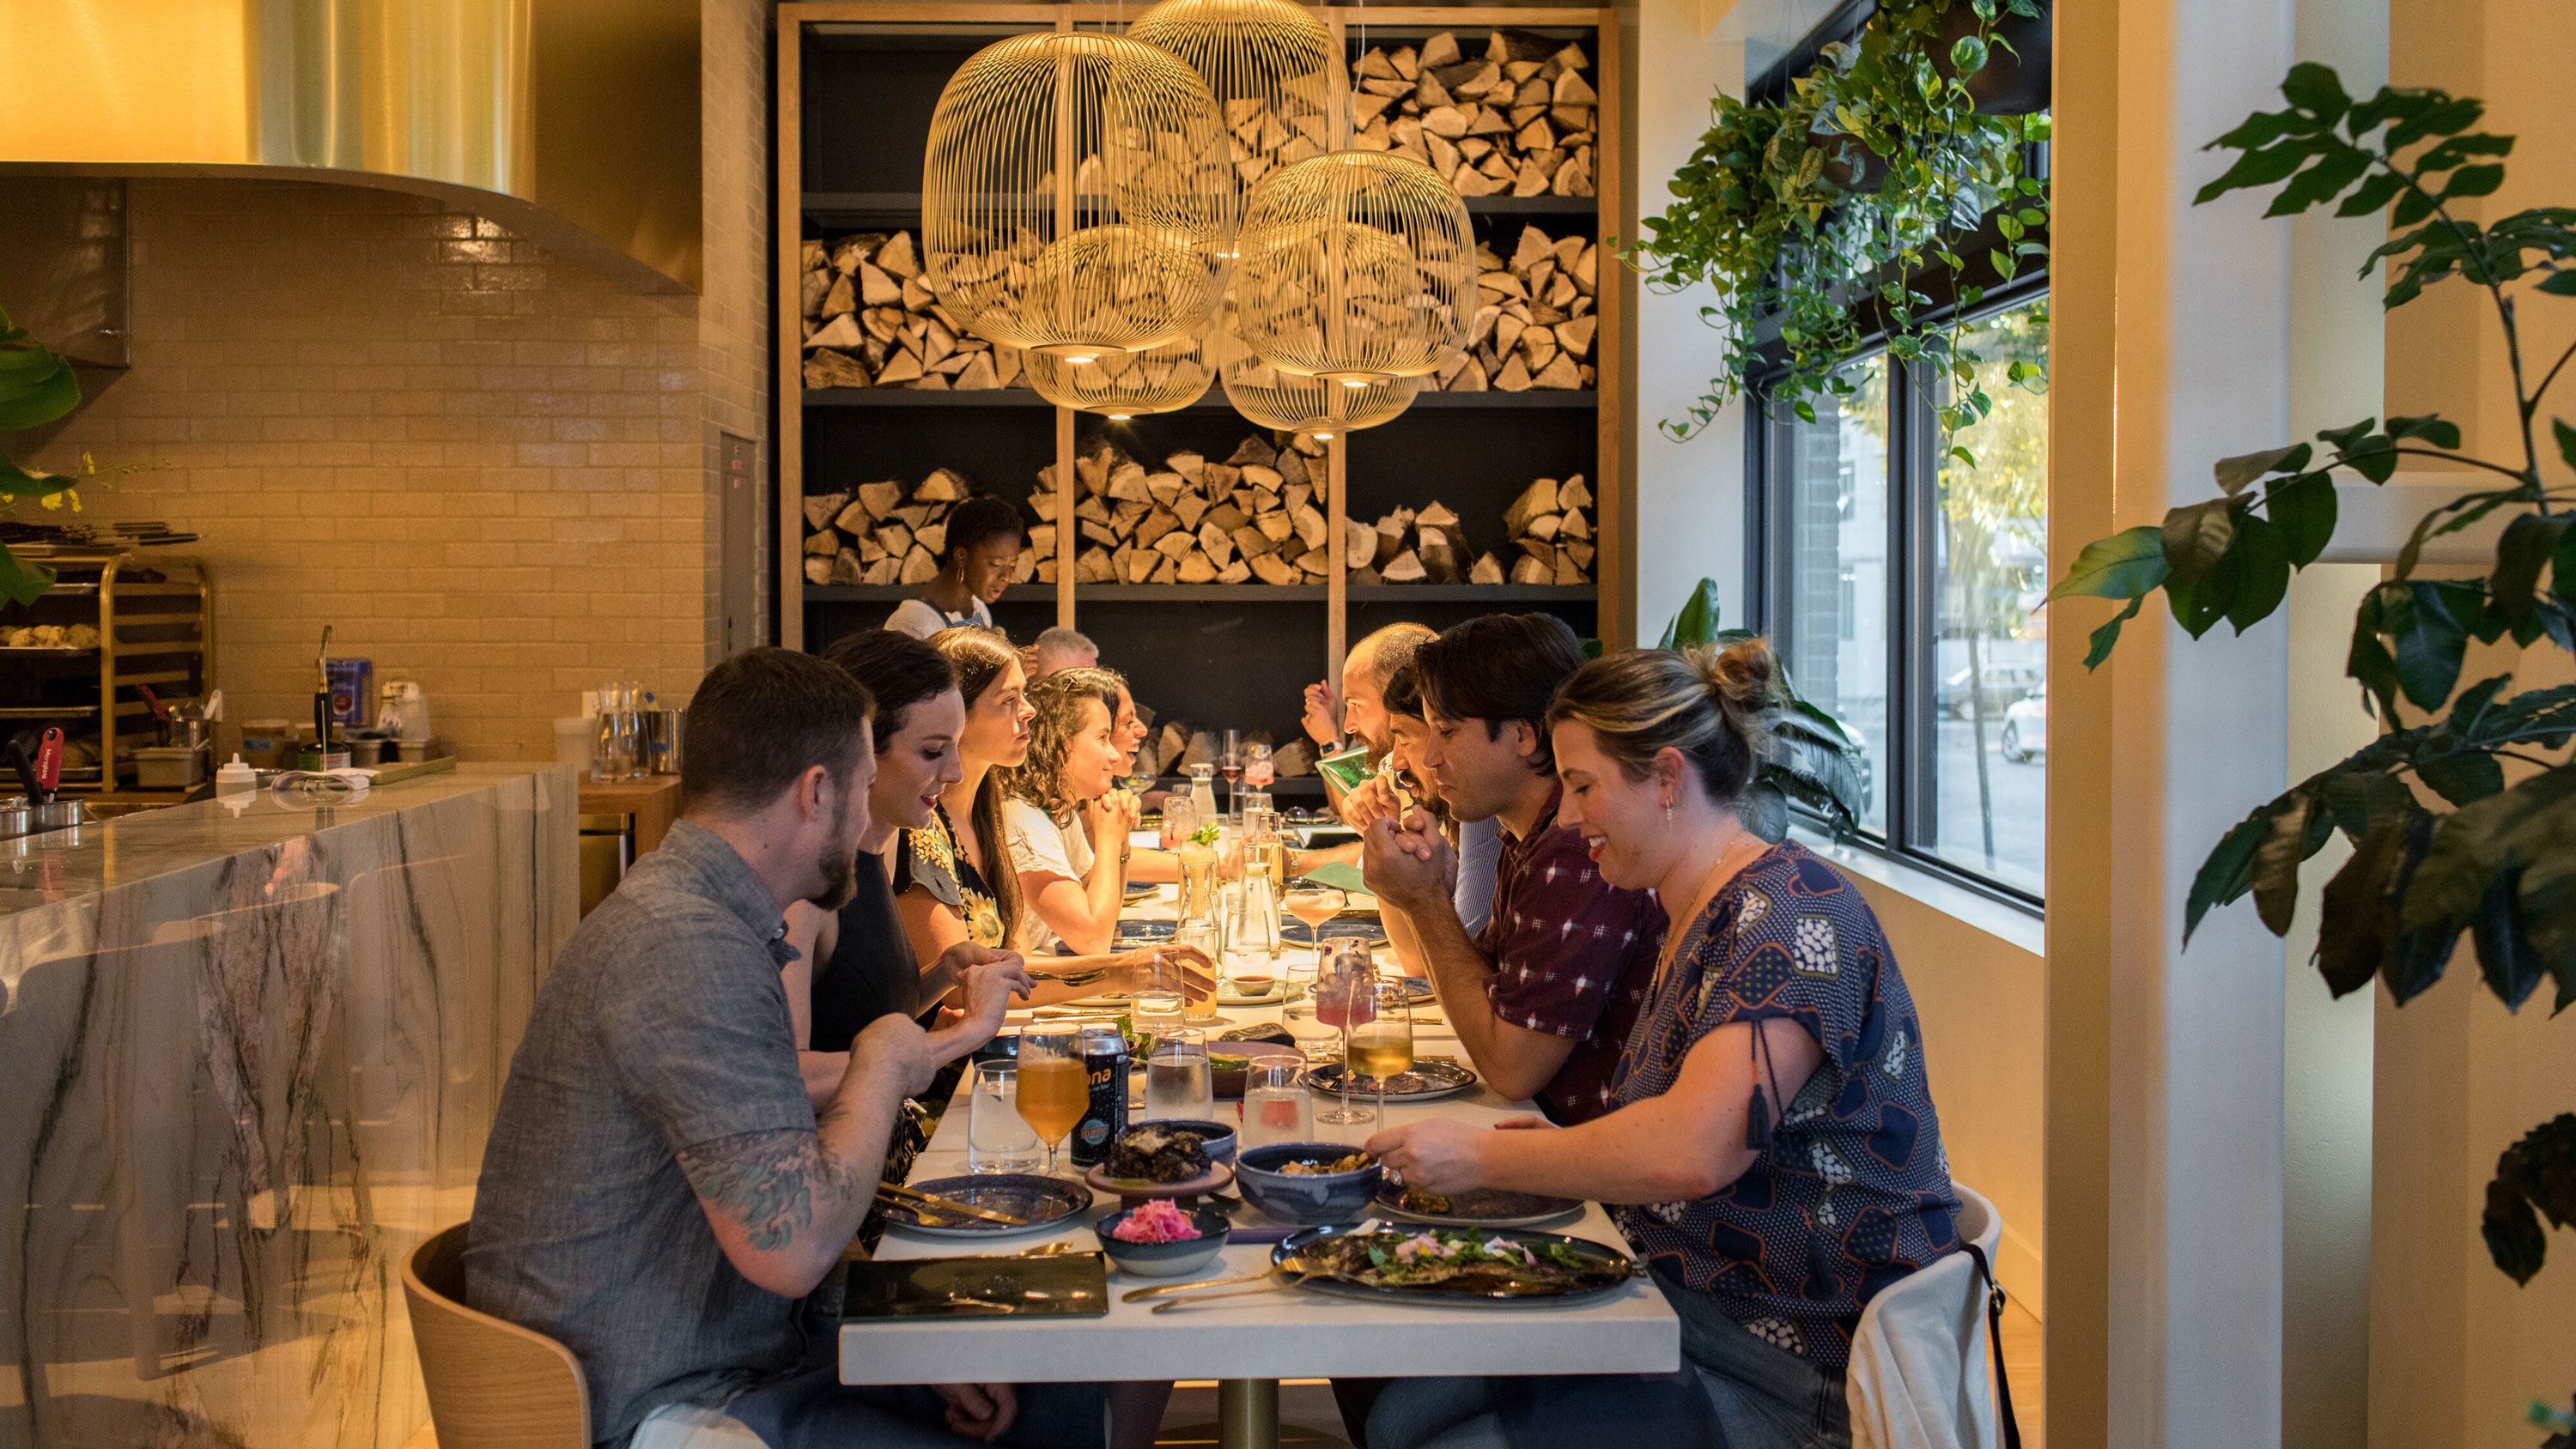 FILE -- Diners at Kann in Portland, Ore., Aug. 25, 2022. Briny flavors, high-end Jell-O shots, a fascination with outer space and a concern for Earth will guide our choices. At least that's what the food forecasters say. (Celeste Noche/The New York Times)